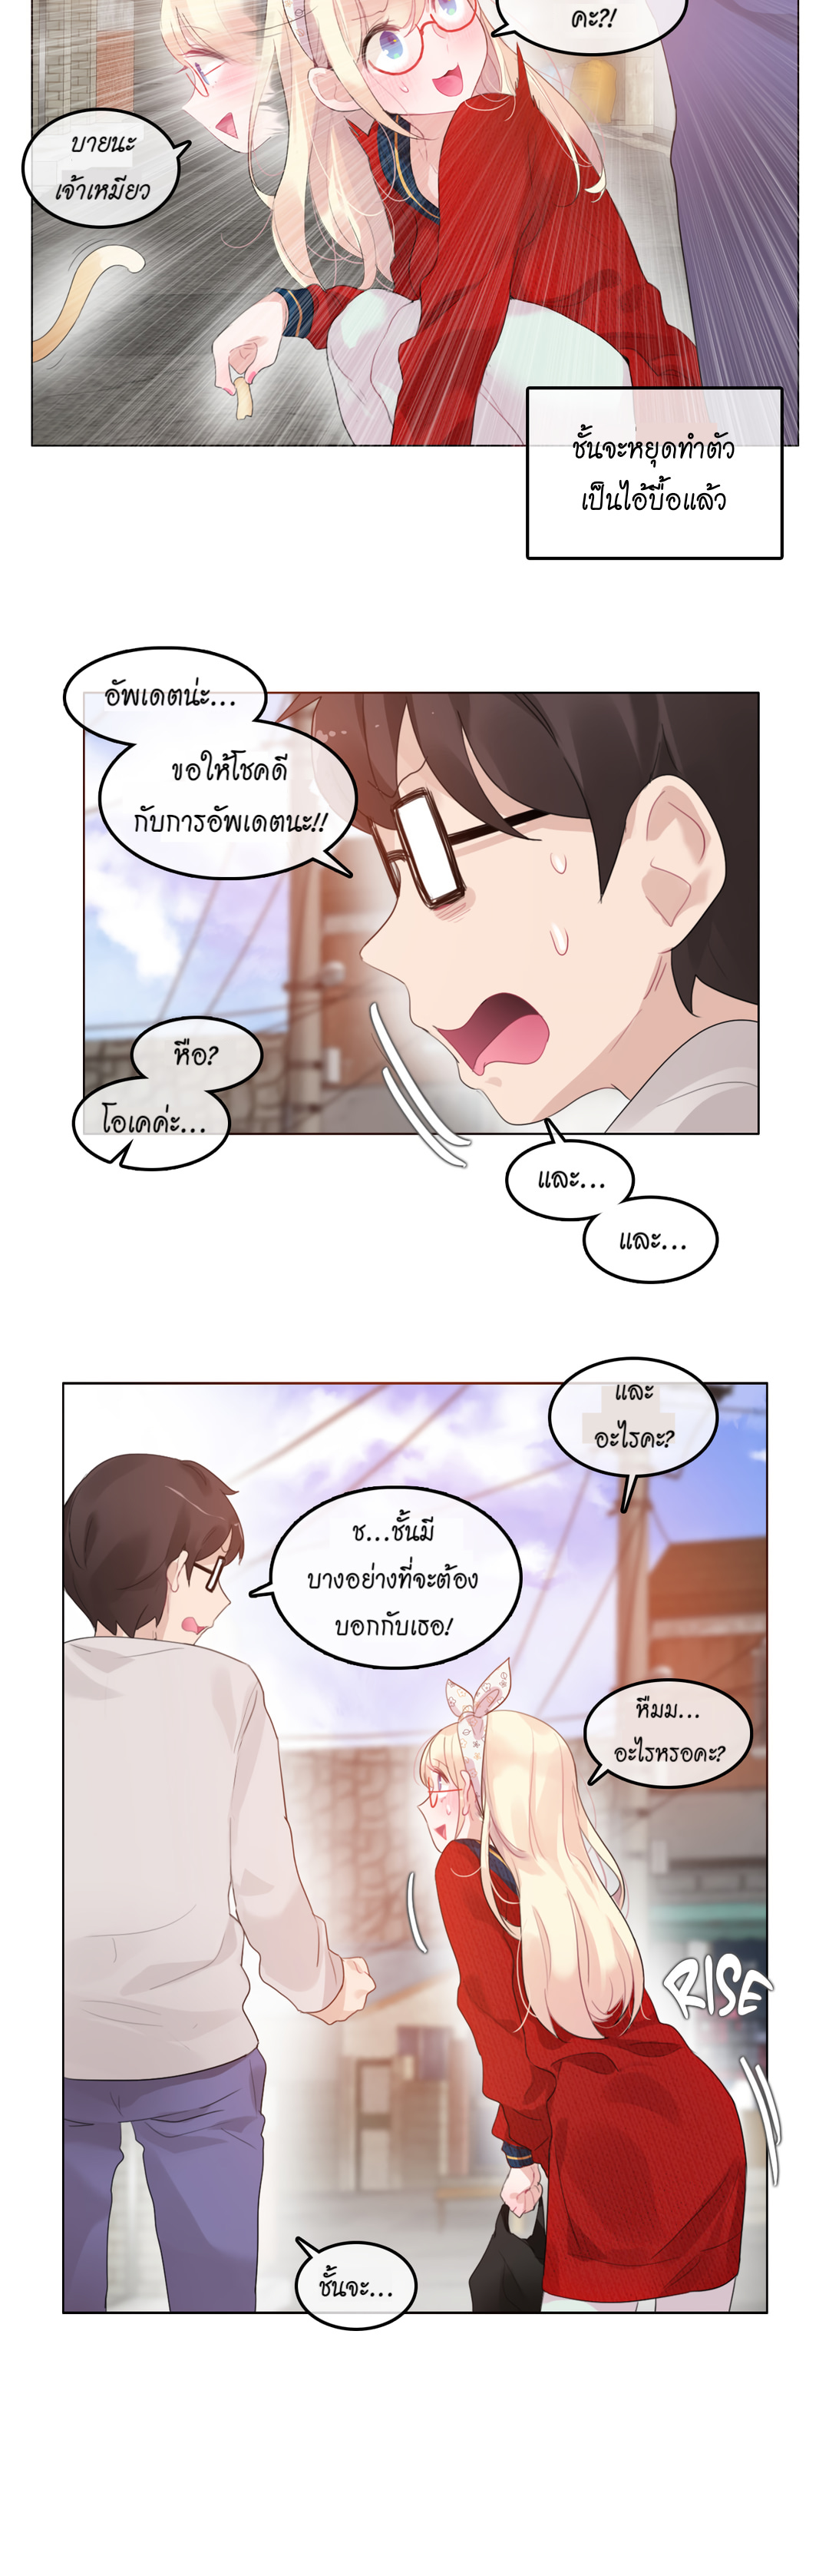 A Pervert’s Daily Life54 (21)